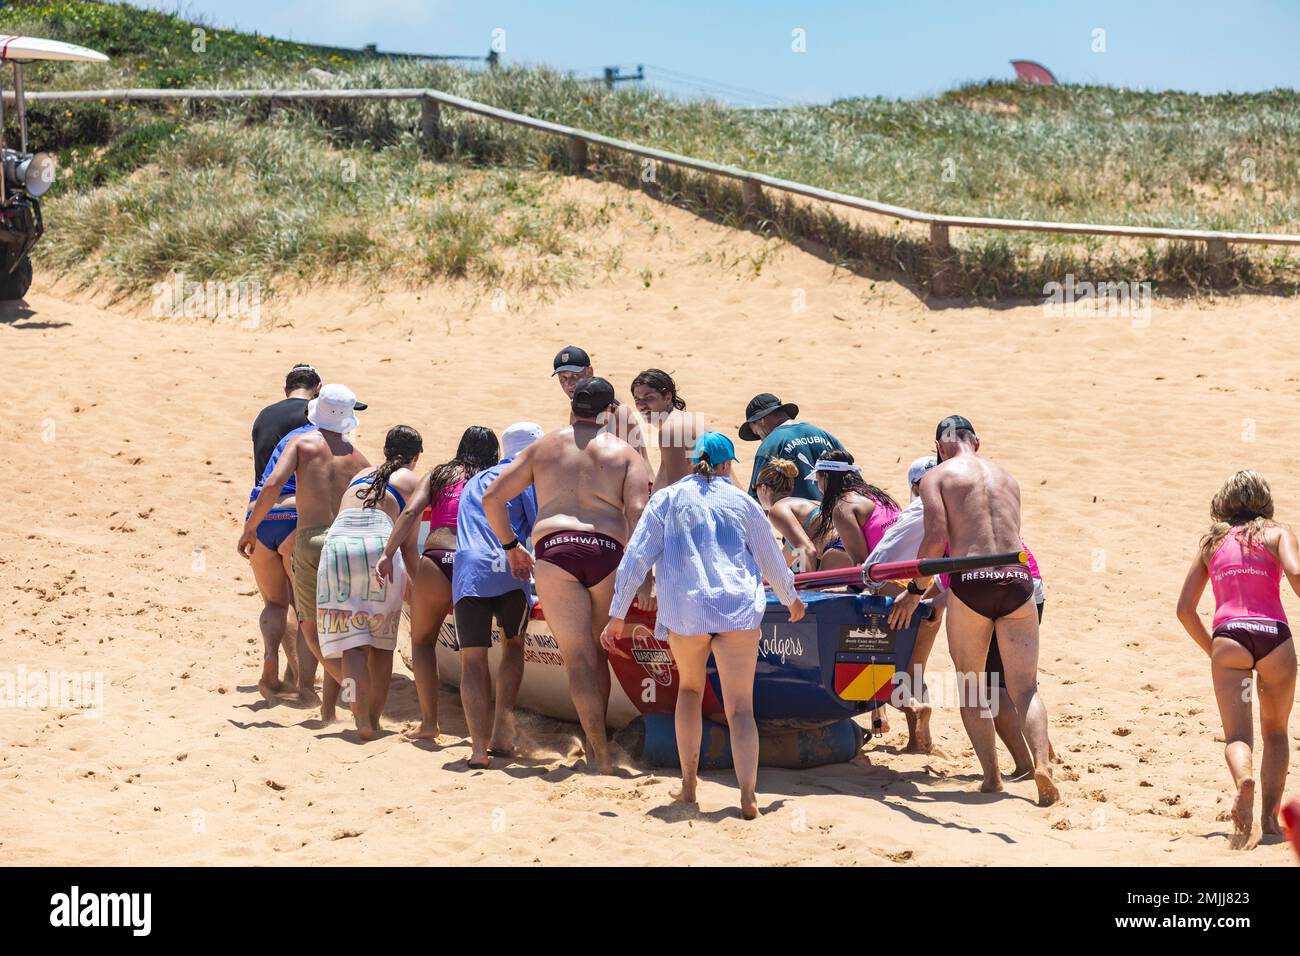 Lifting traditional surfboat across the sand at end of ocean racing,Sydney,NSW,Australia Stock Photo